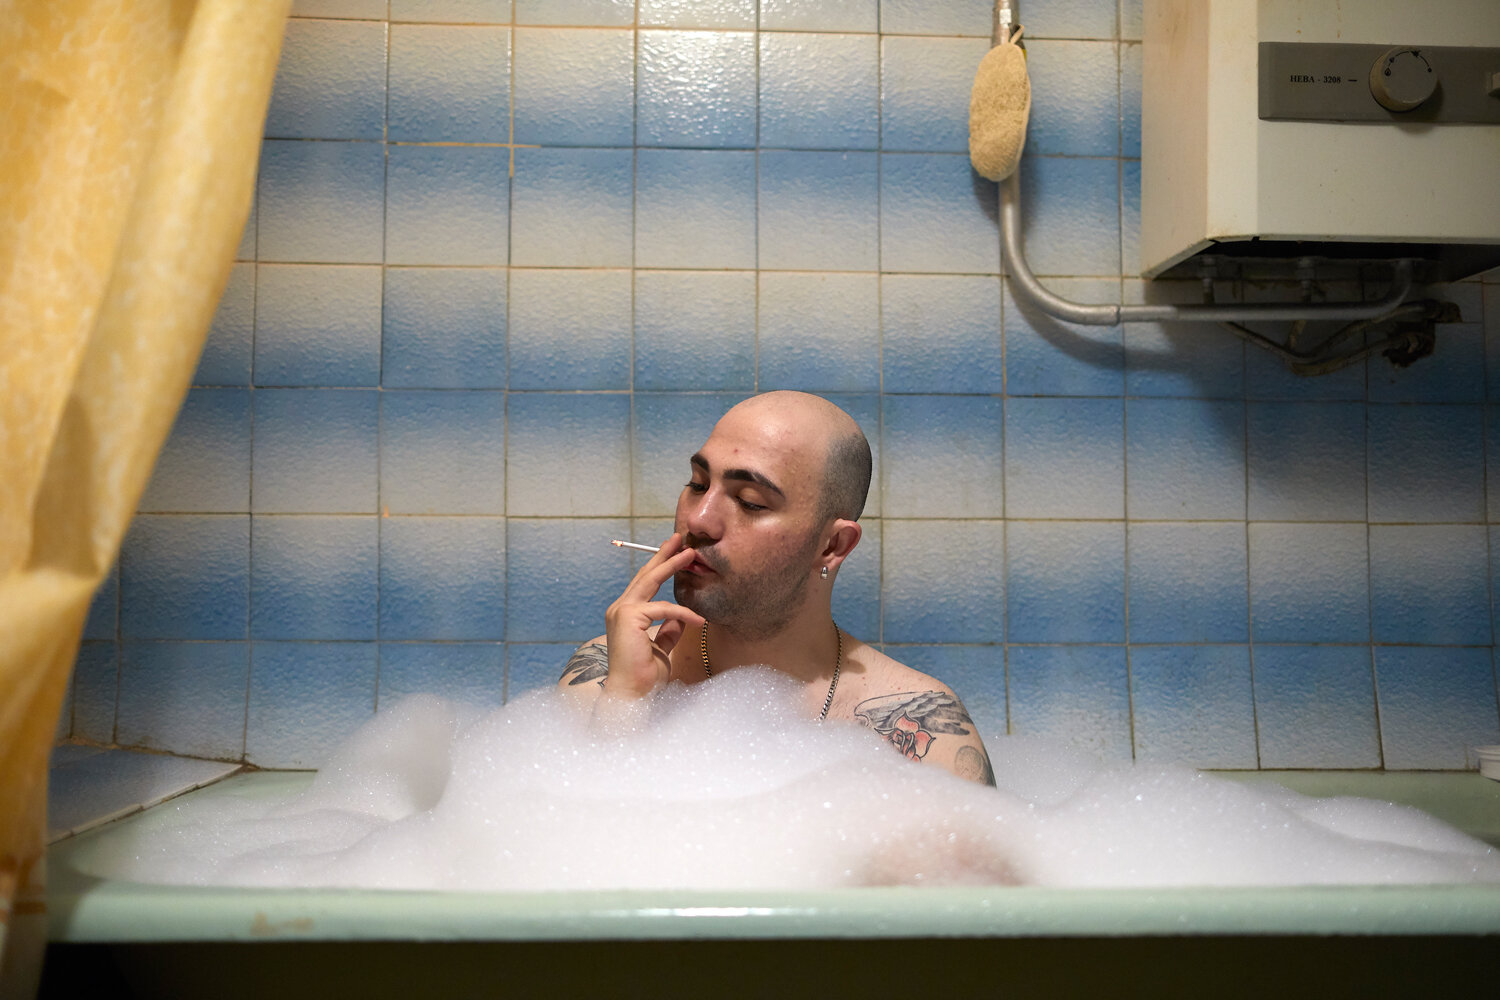  Russia, Moscow, 14/04/2019. Konstantin Prima (28) in his bath tub. He is openly gay. He earns his money by performing as a famous Russian singer Alla Pugacheva.  